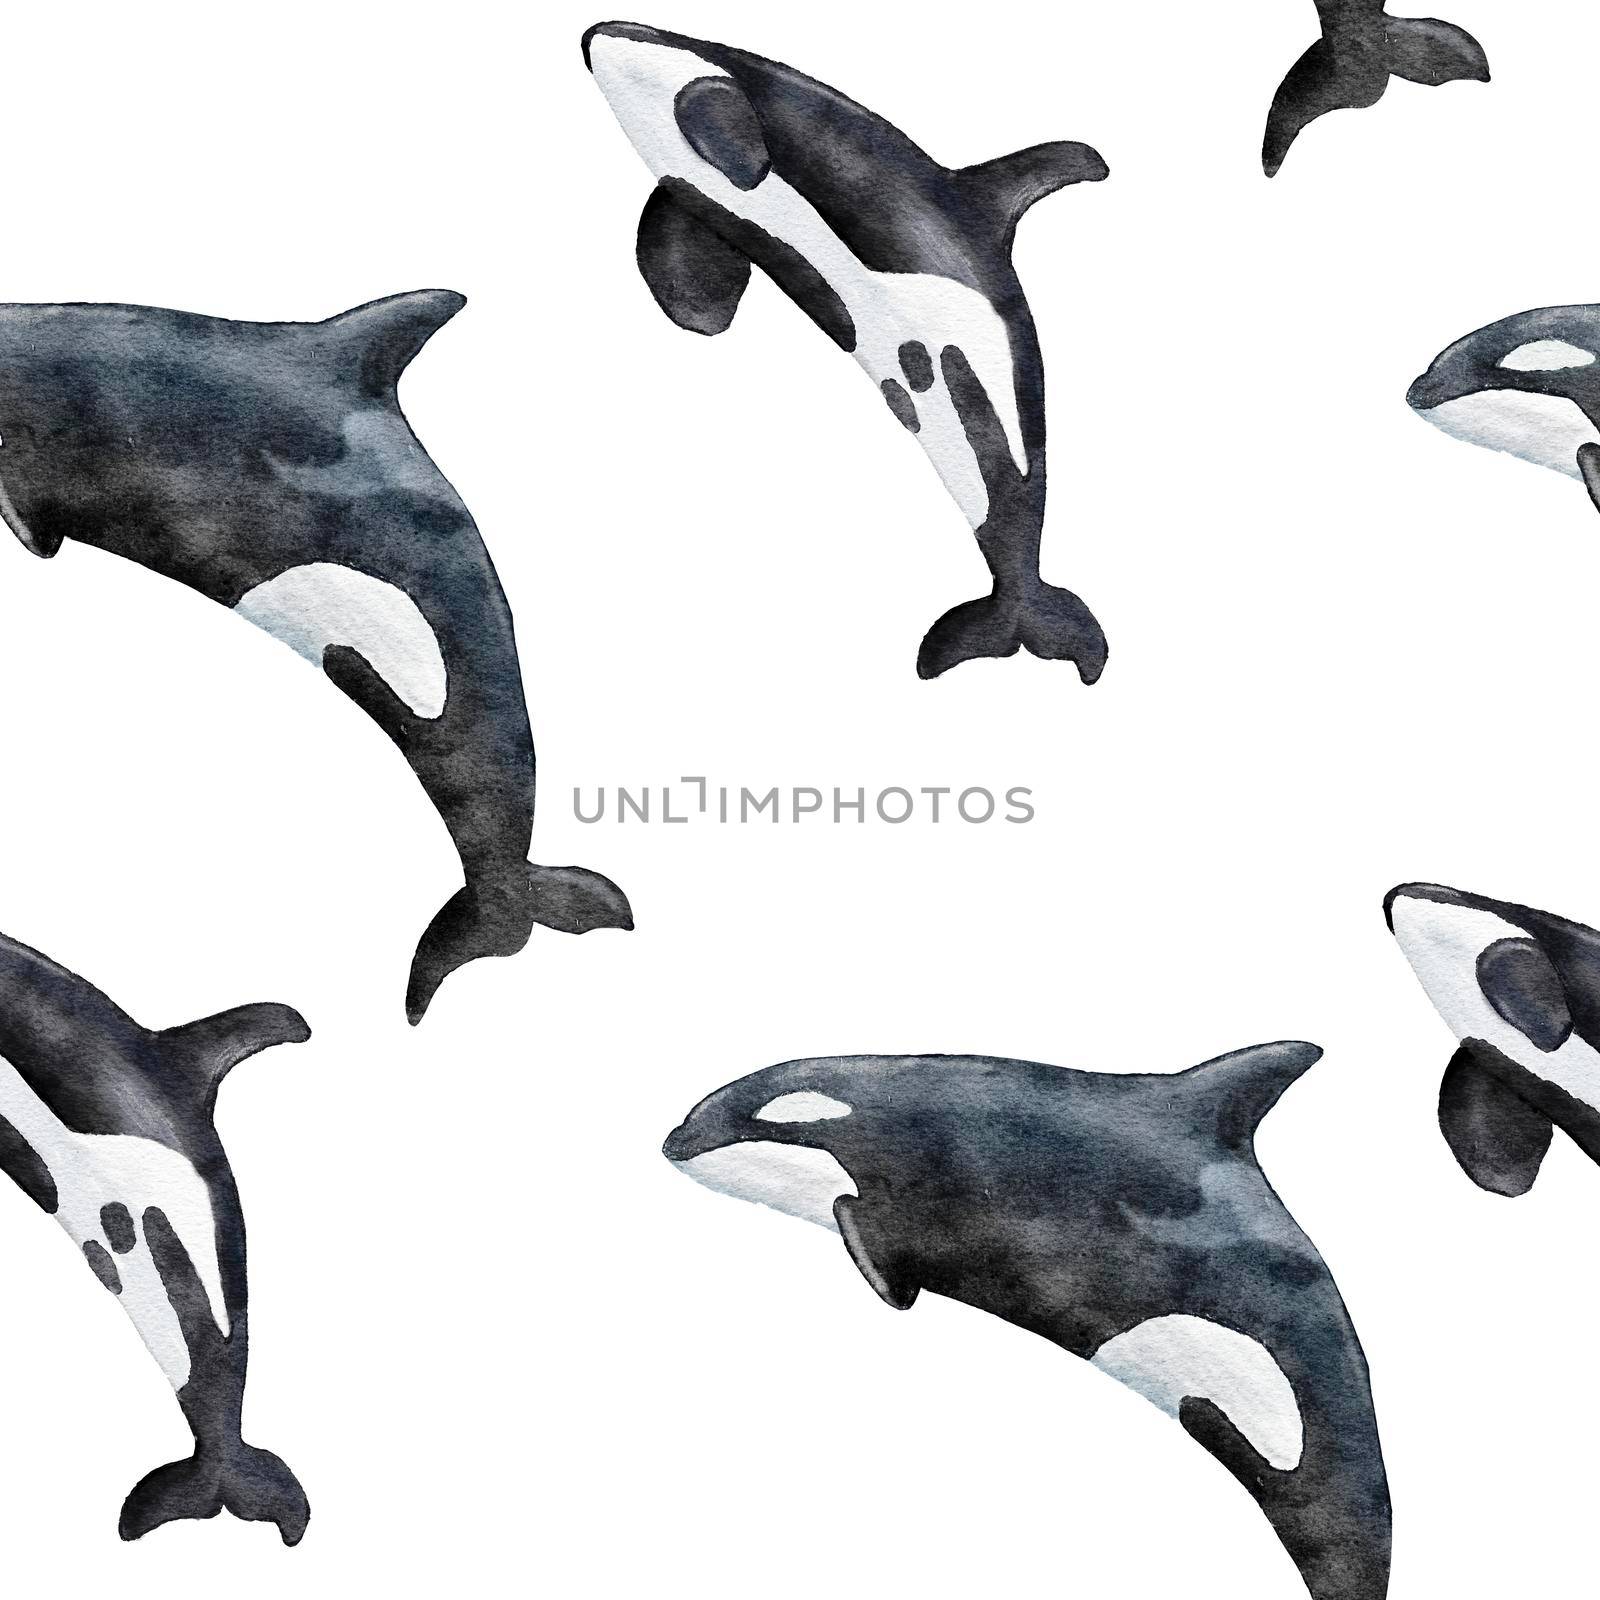 Hand drawn watercolor seamless pattern with orca killer whale. Sea ocean marine animal, nautical underwater endangered mammal species. Blue gray illustration for fabric nursery decor, under the sea prints. by Lagmar